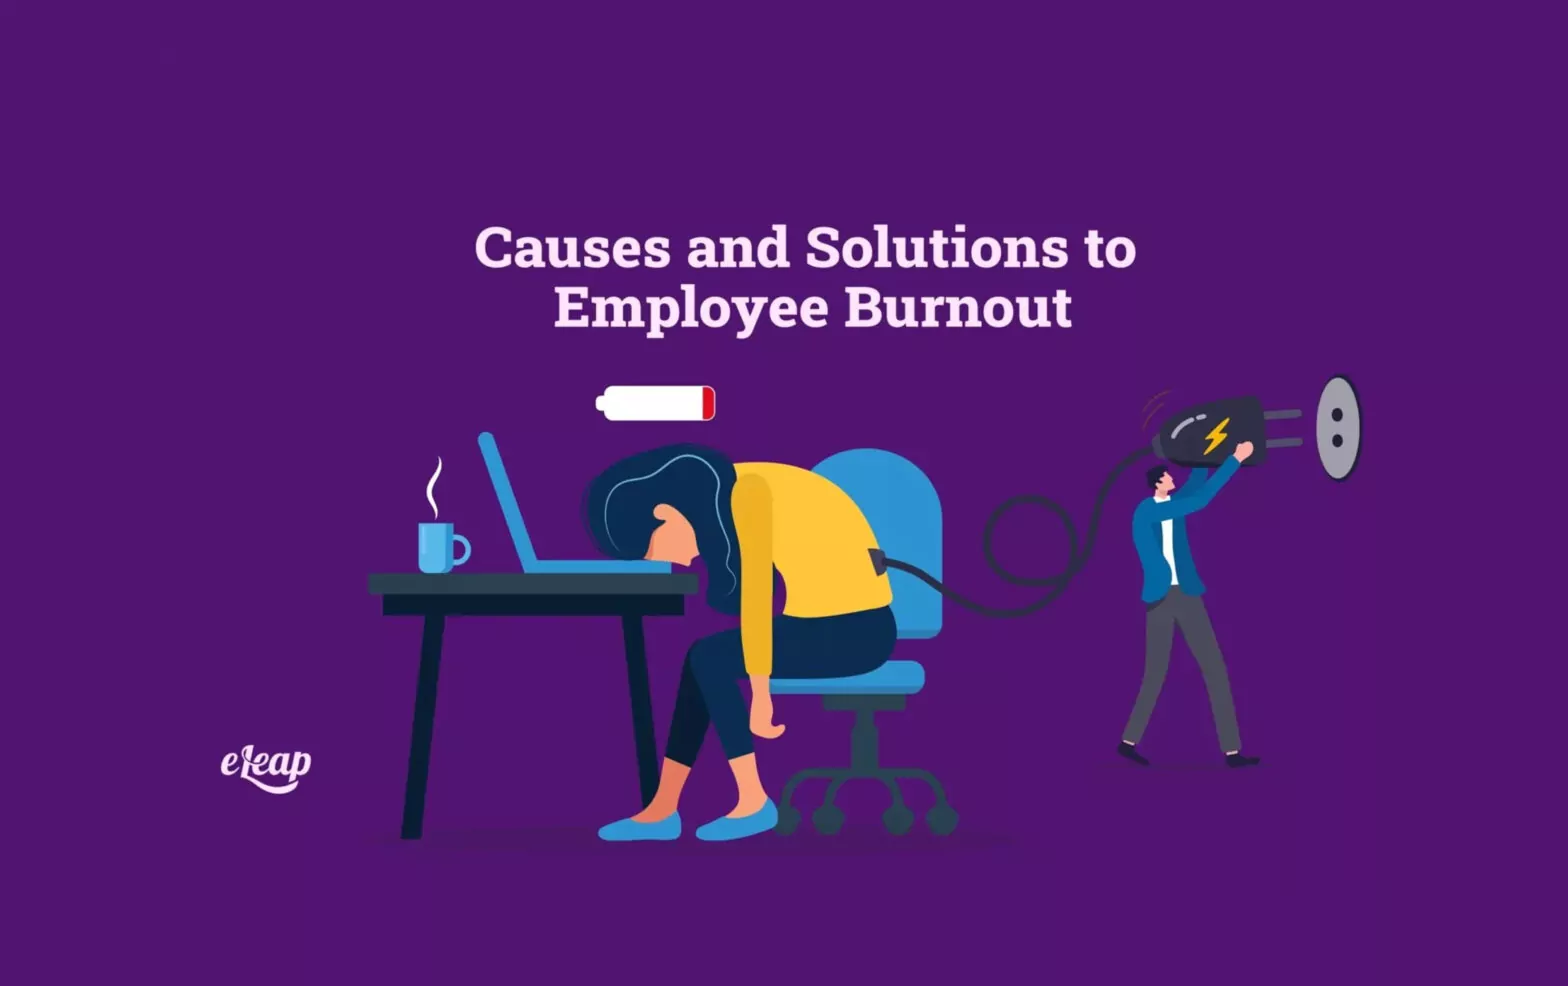 Causes and Solutions to Employee Burnout